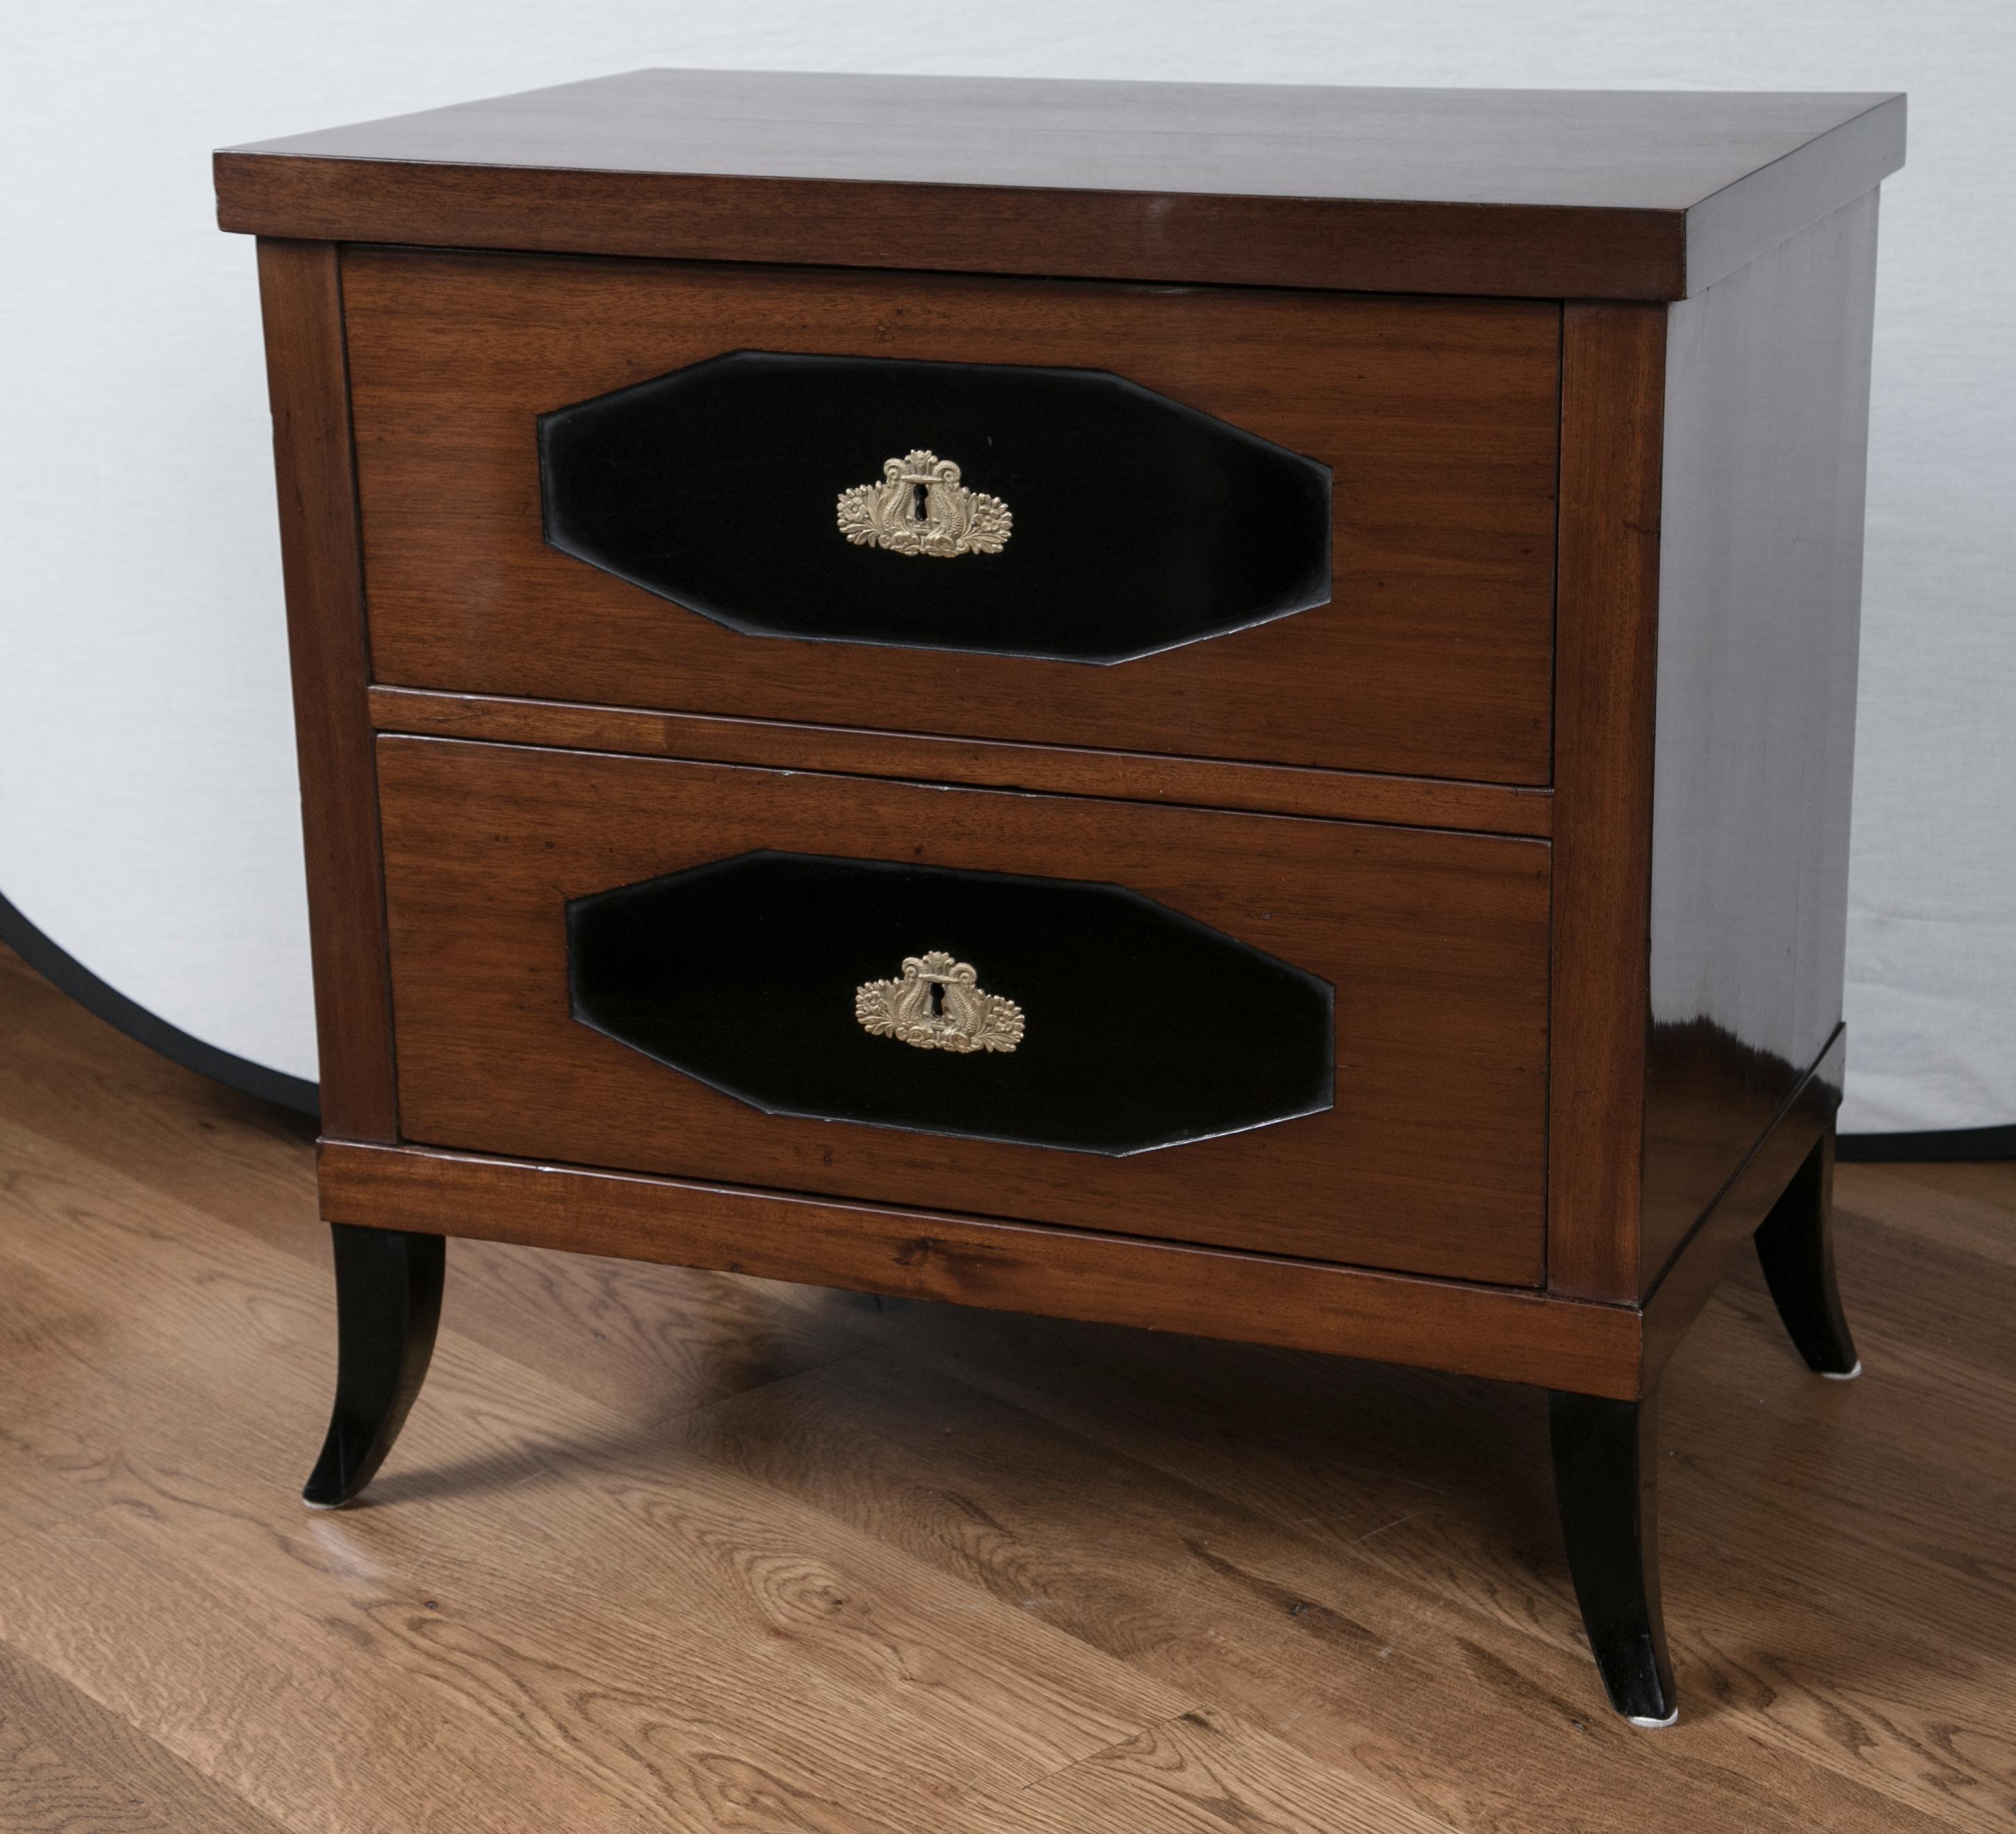 Elegant small neoclassic two drawer chest in walnut veneer on pine with ebonized interior panels and splayed legs, all original
Origin: Vienna
Condition: Excellent, French polished
Dimension: 30 1/2